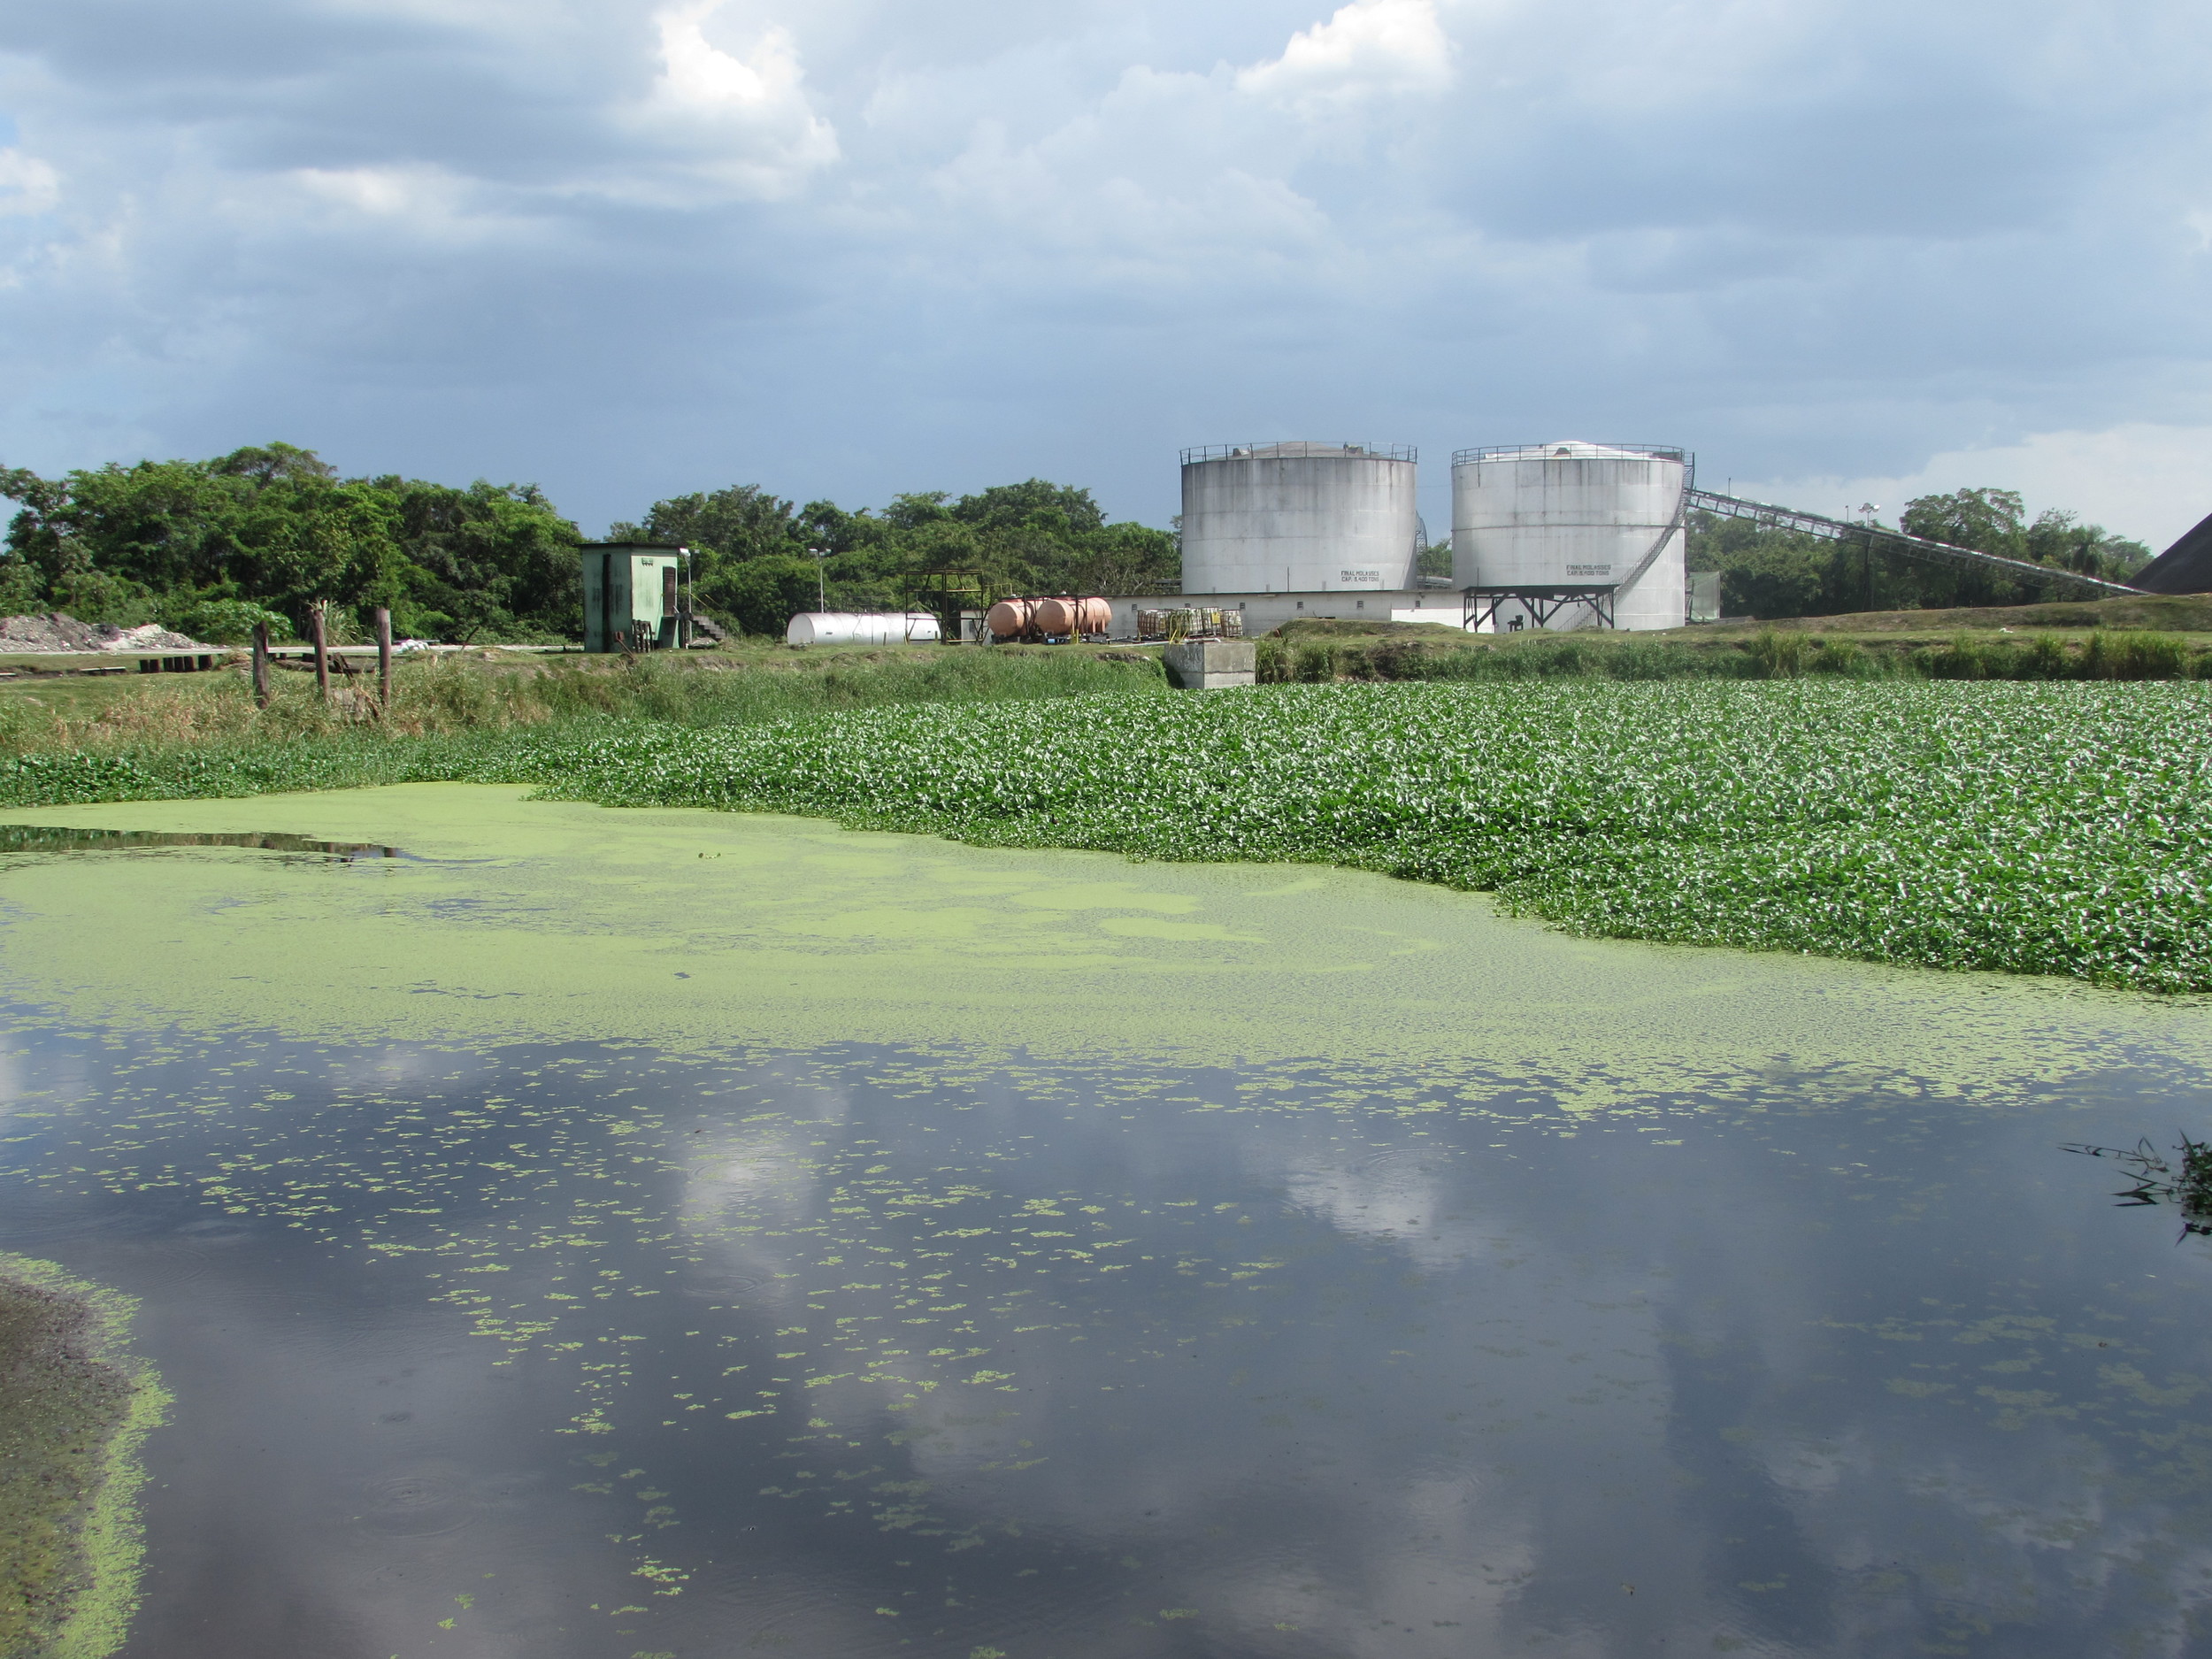 One of the Oxidation Ponds at BSI's Waste Water Treatment System